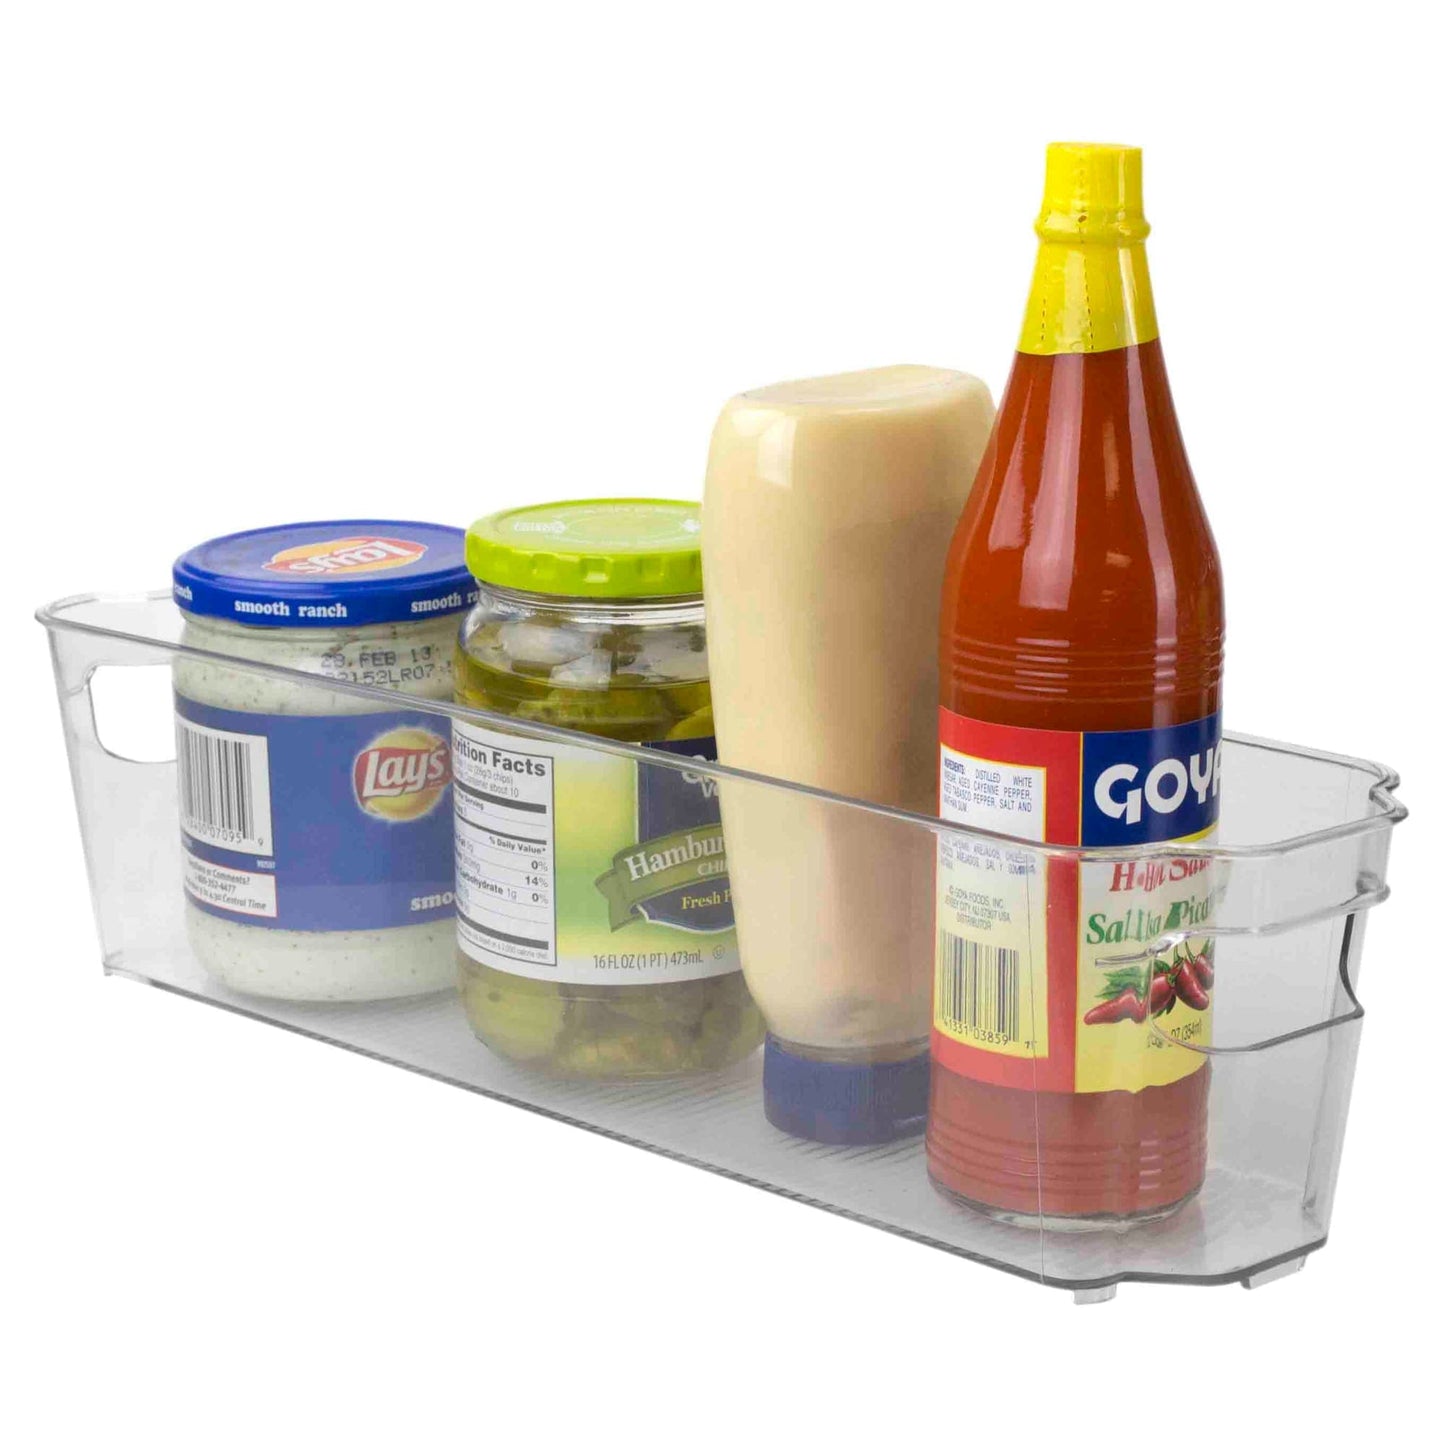 Refrigerator Bins For Food Storage - Multipurpose Stackable Clear